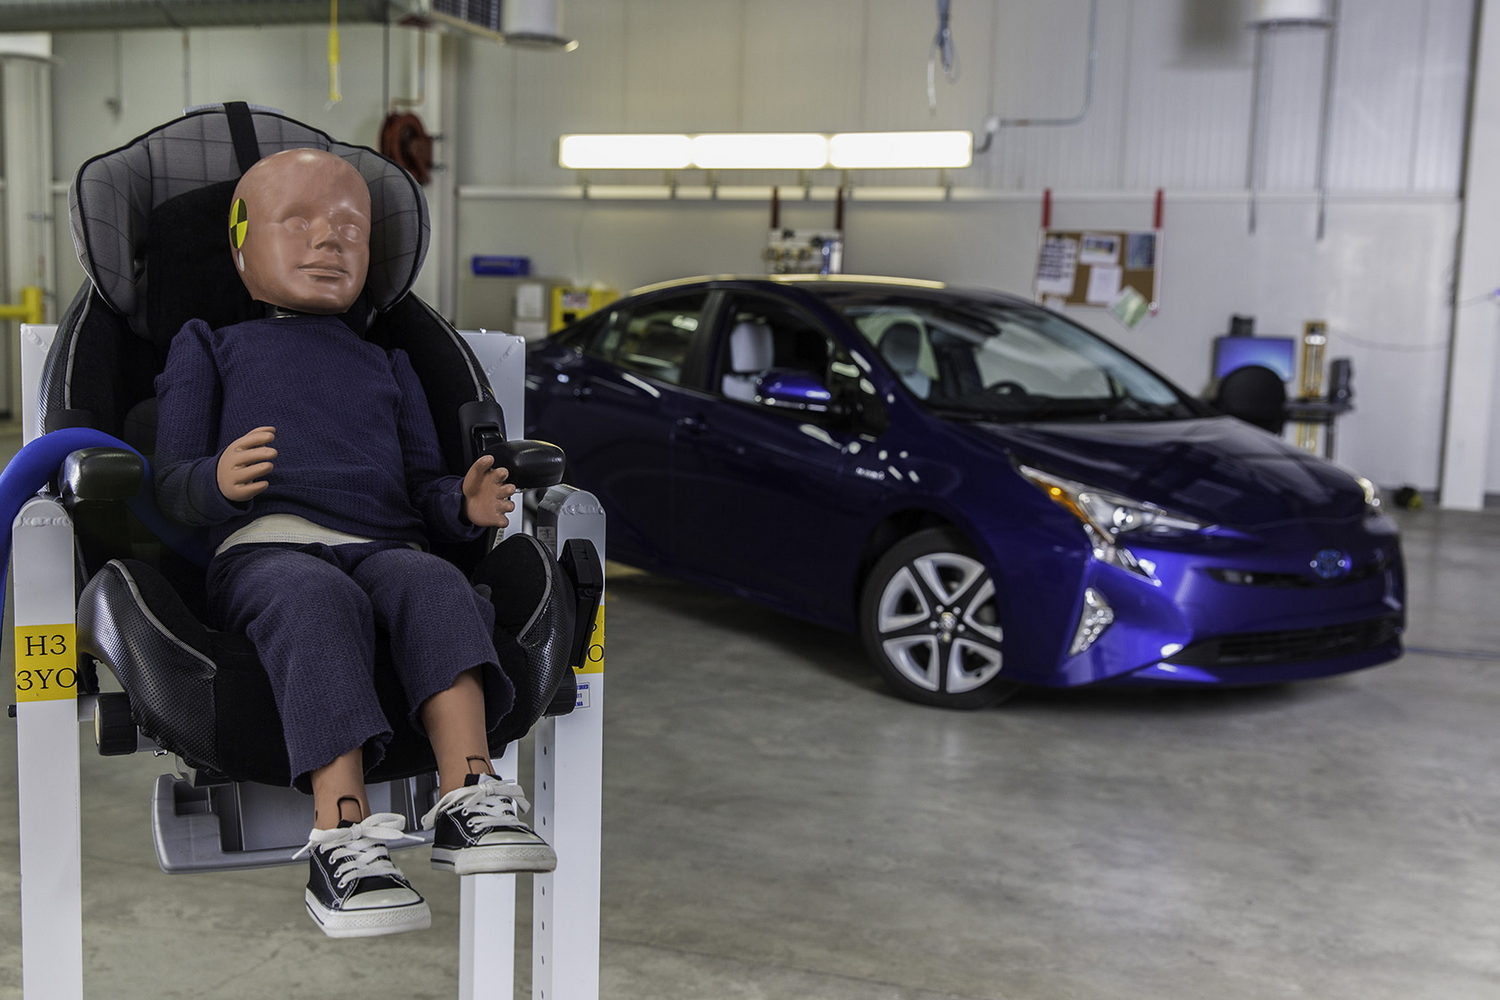 Story of road safety: the crash test dummy